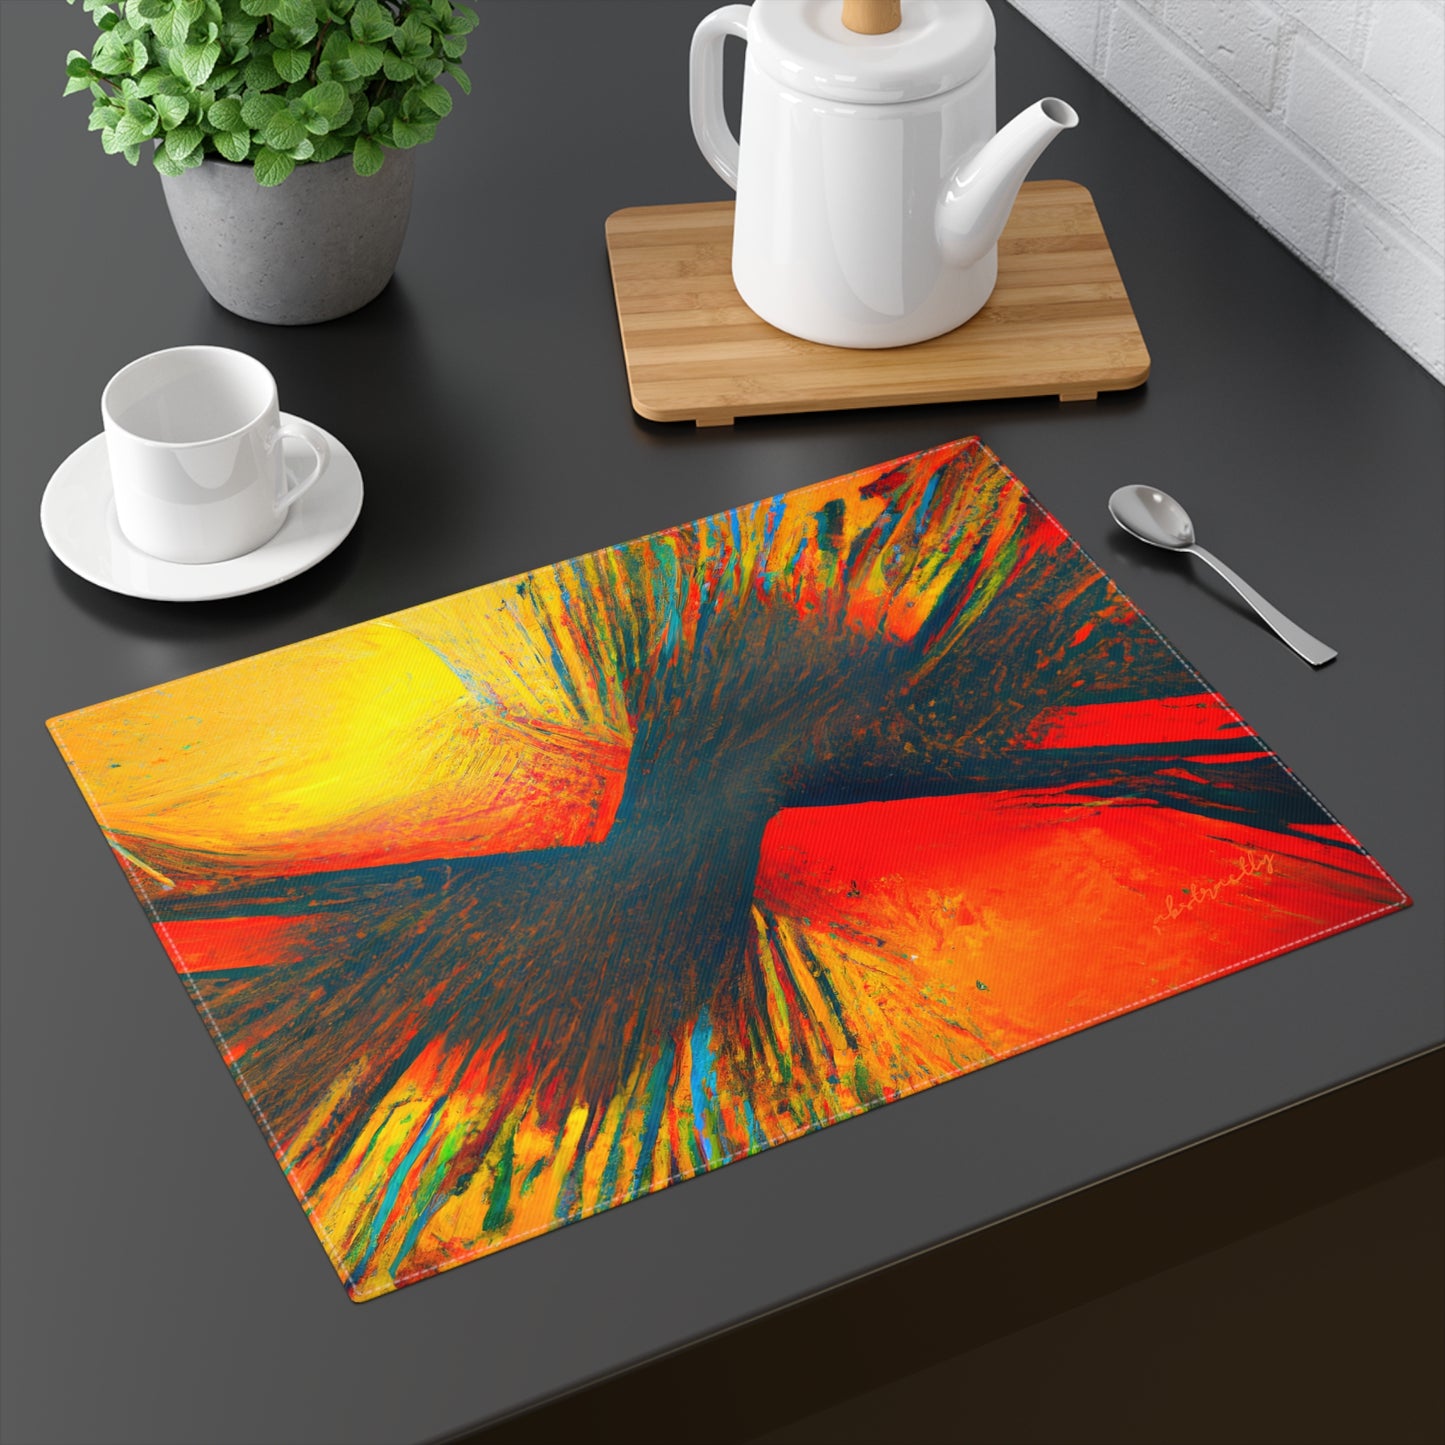 Frances Richter - Gravity Force, Abstractly - Placemat